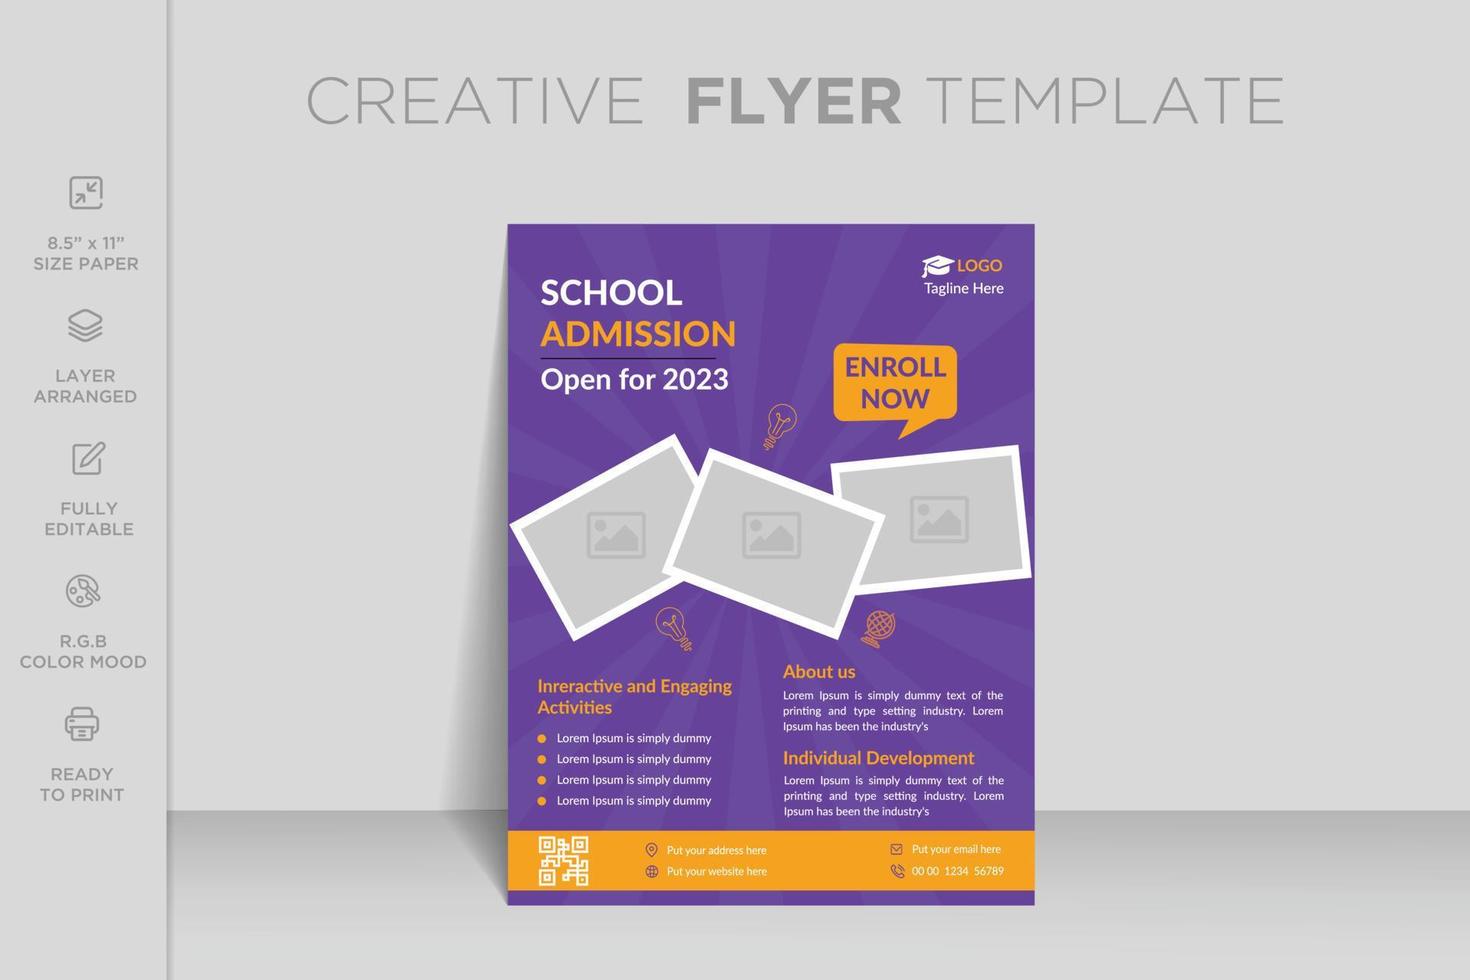 School admission flyer design template. Back to school admission social media post or back to school web banner template or square flyer poster, School admission social media post. vector